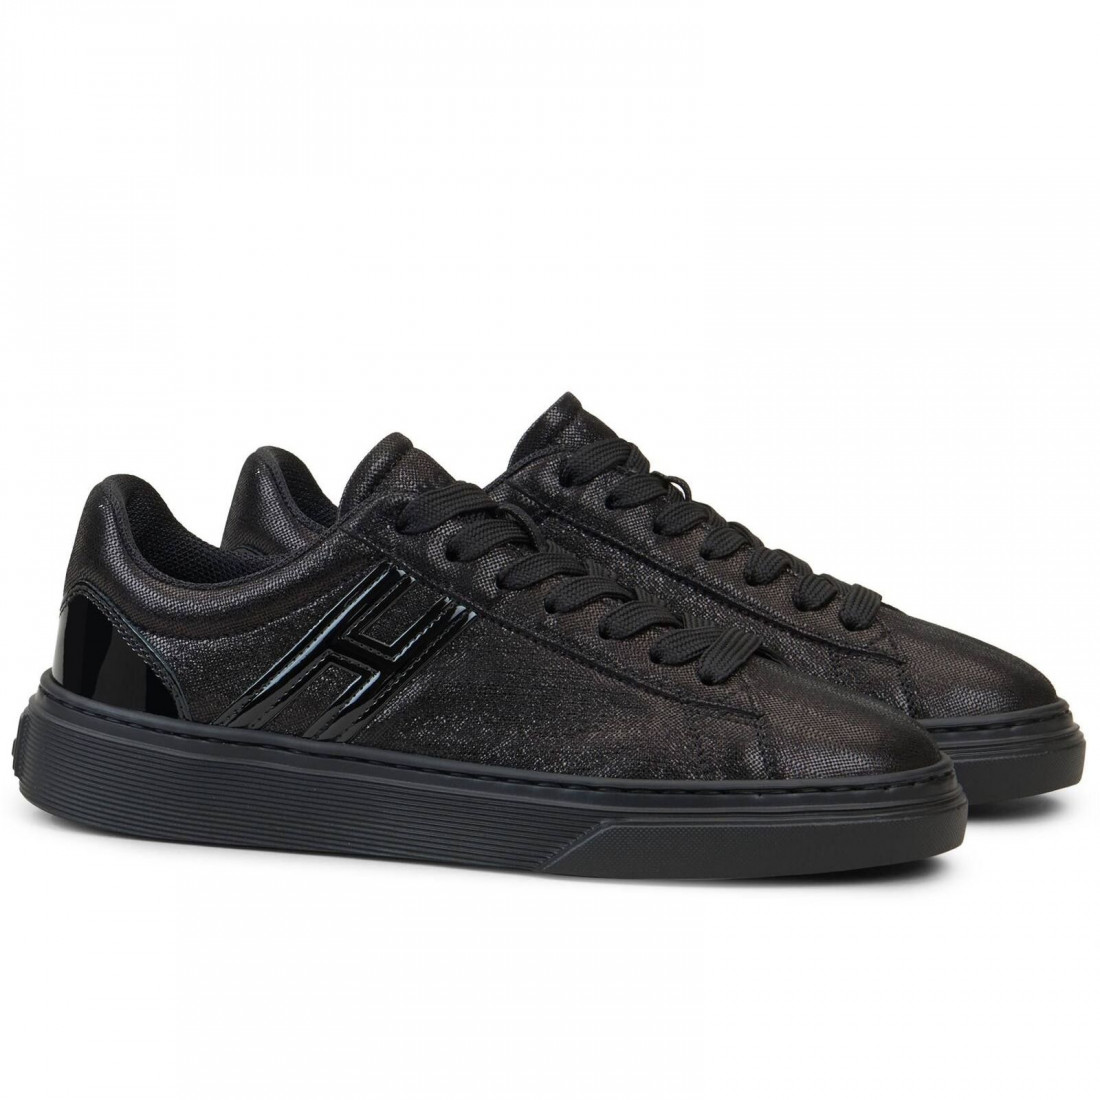 Janice Telemacos Ambassade Women's Hogan H365 sneakers in black leather